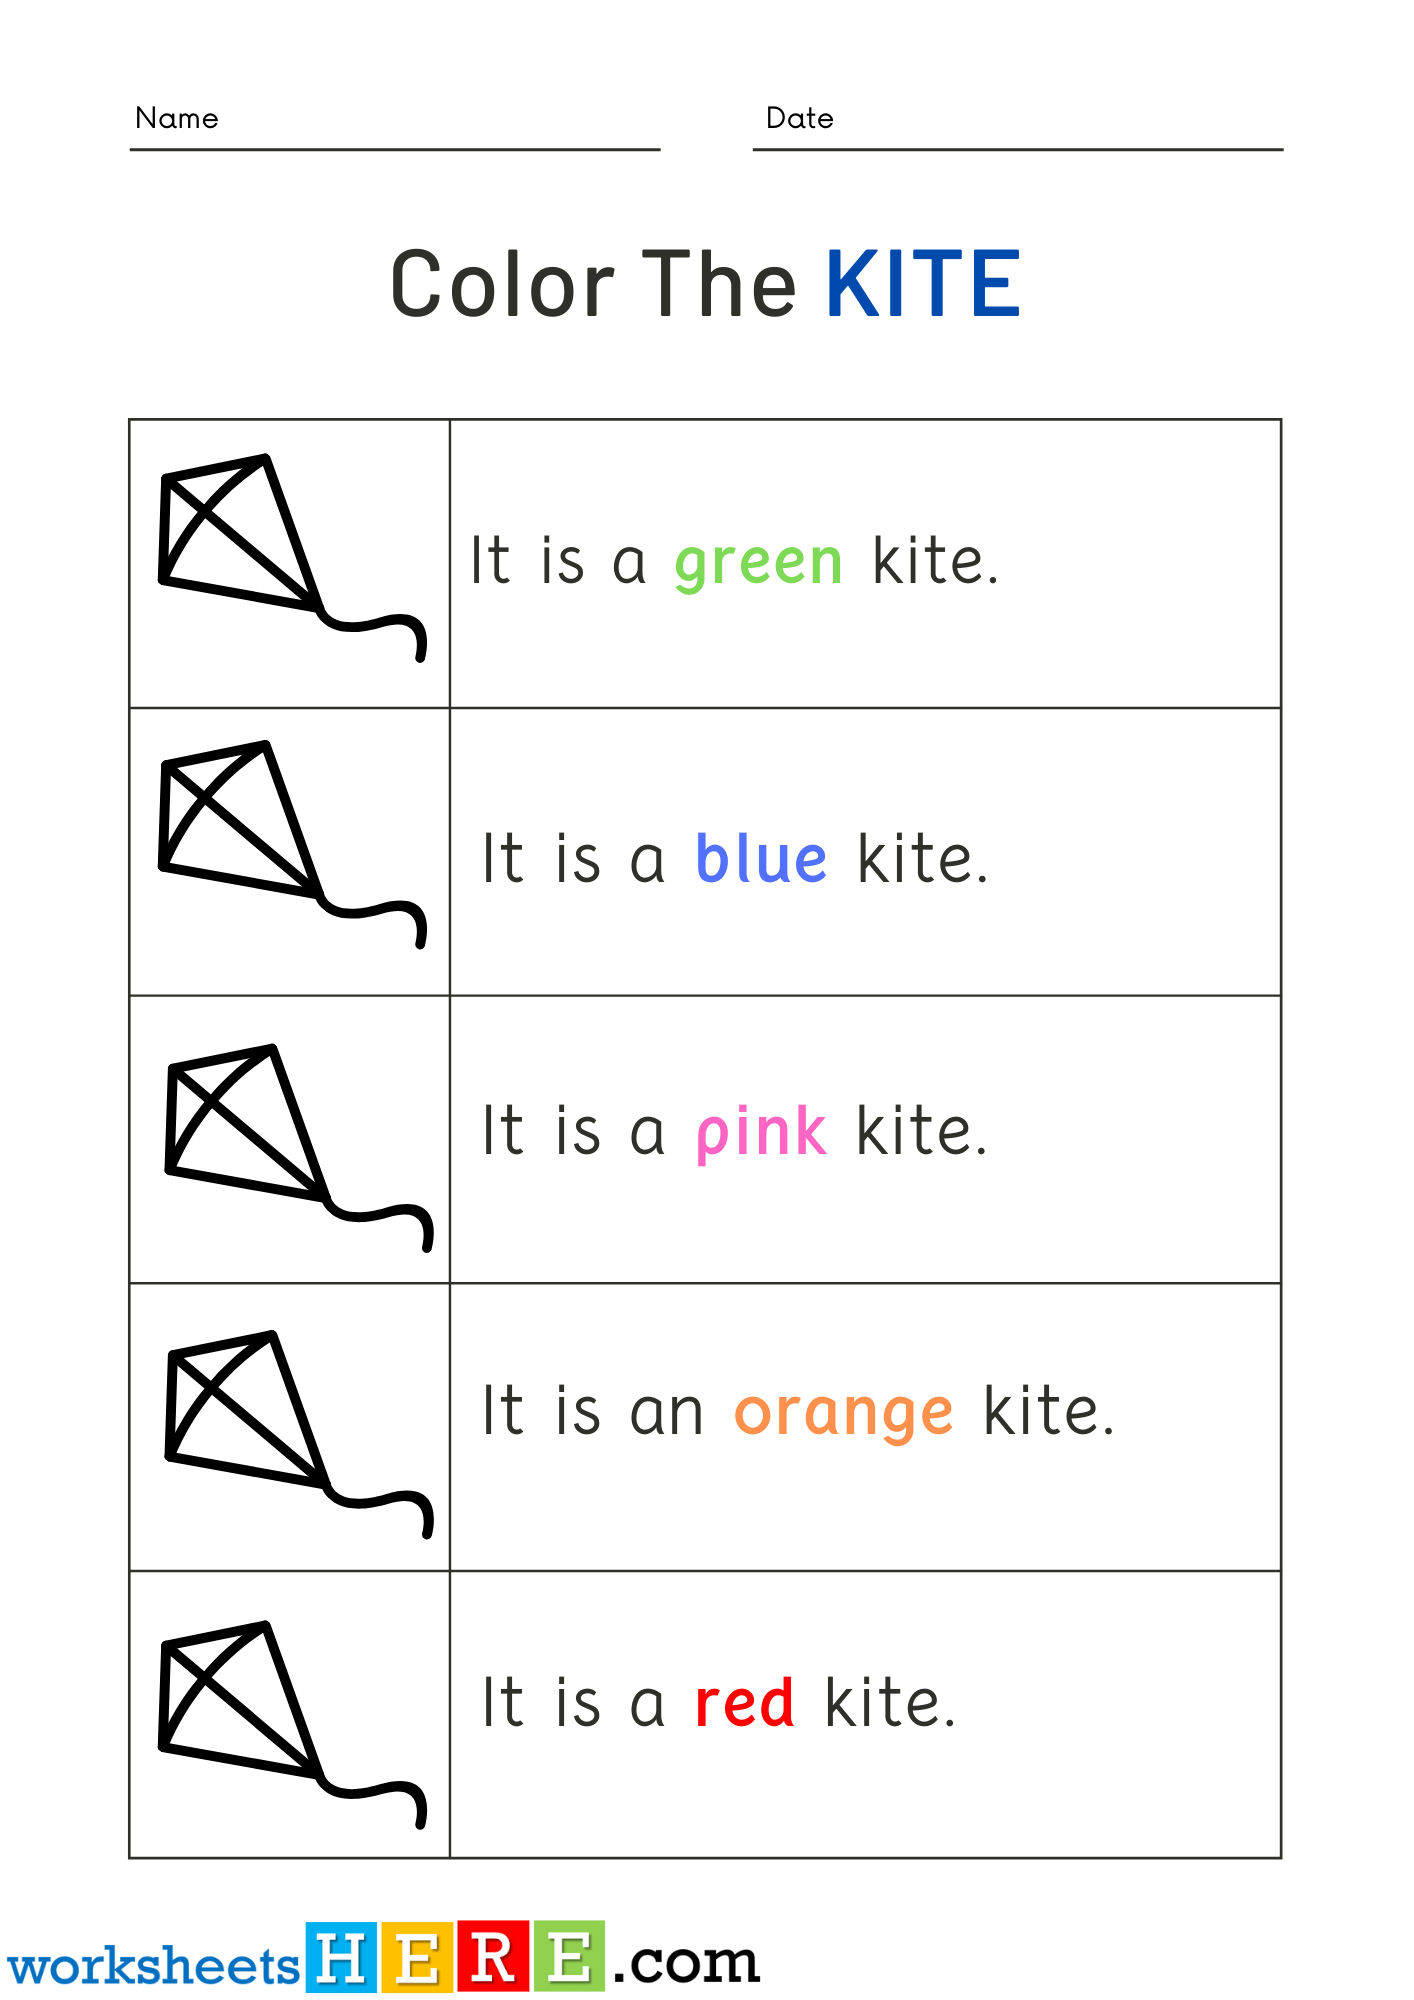 Read Words and Color Kite Pictures Activity PDF Worksheets For Kindergarten